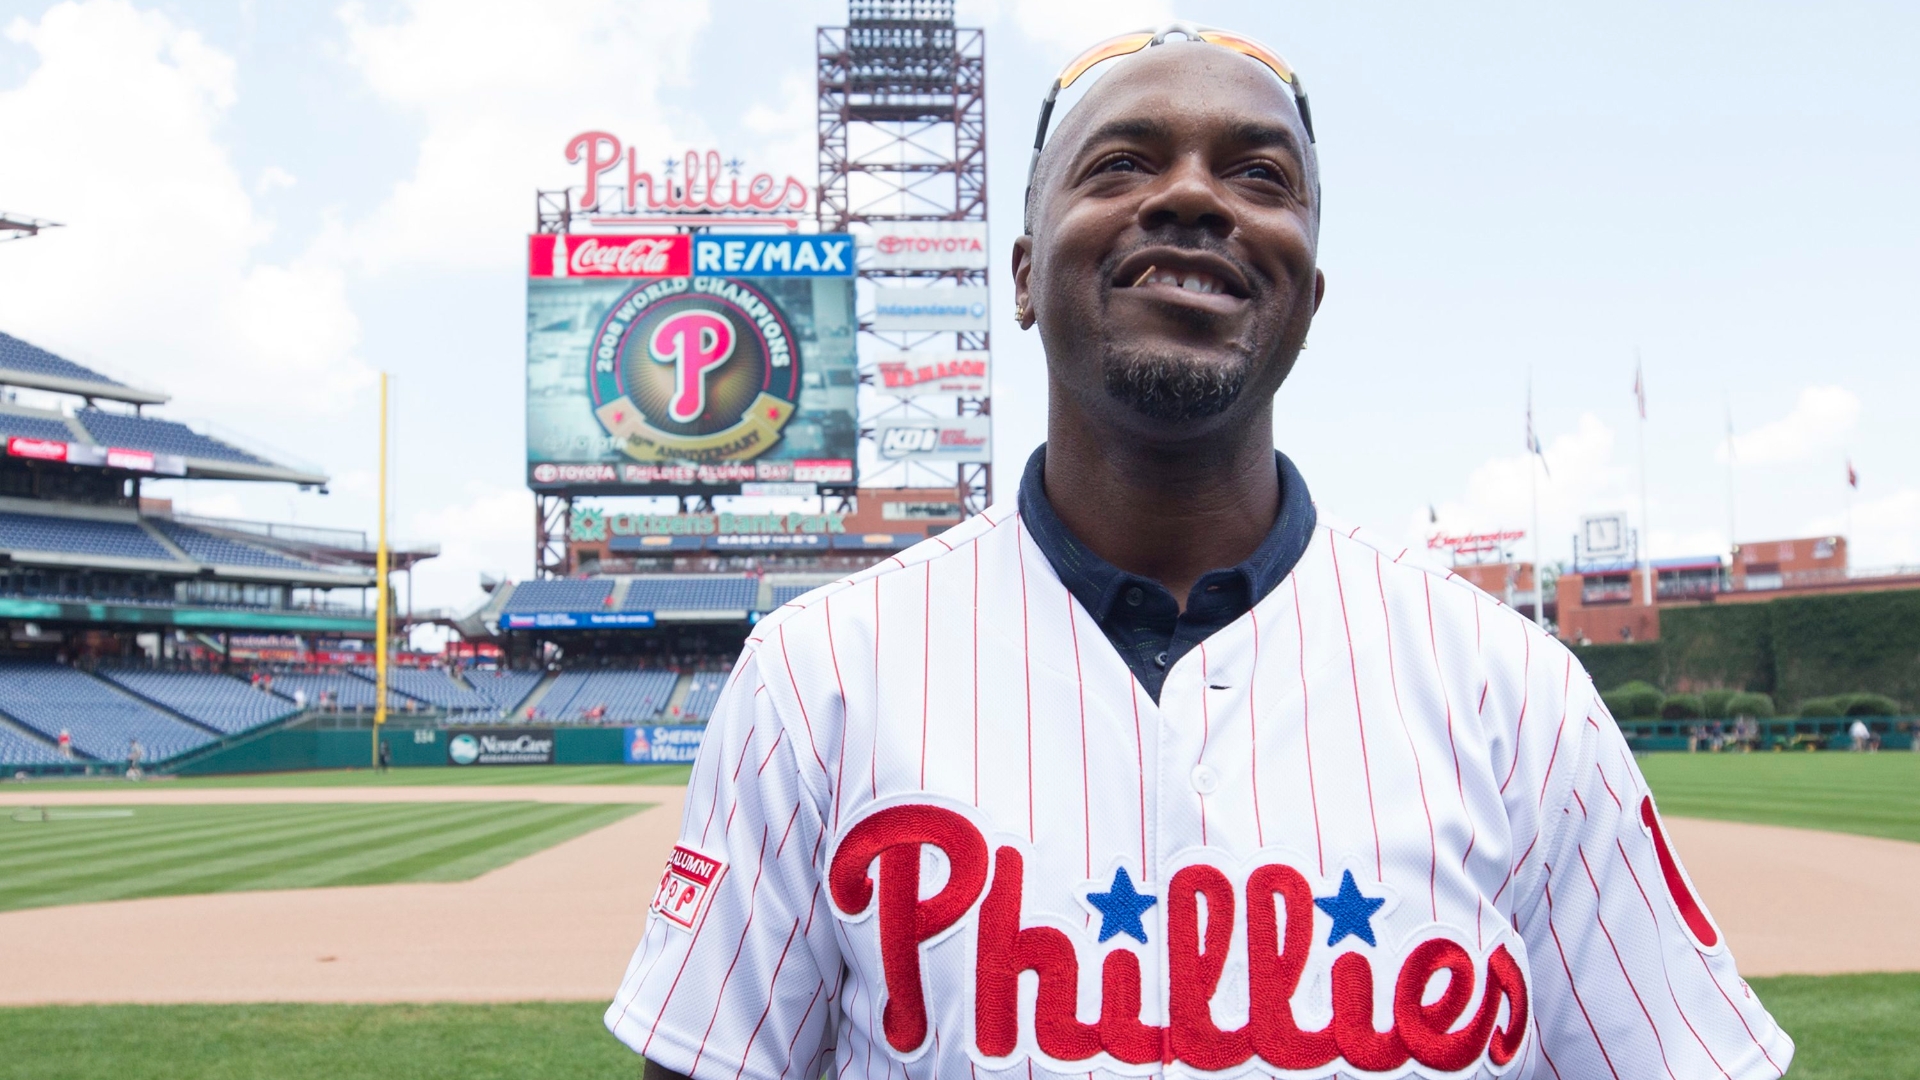 Jimmy Rollins' Hall of Fame moment: The walk-off that shook